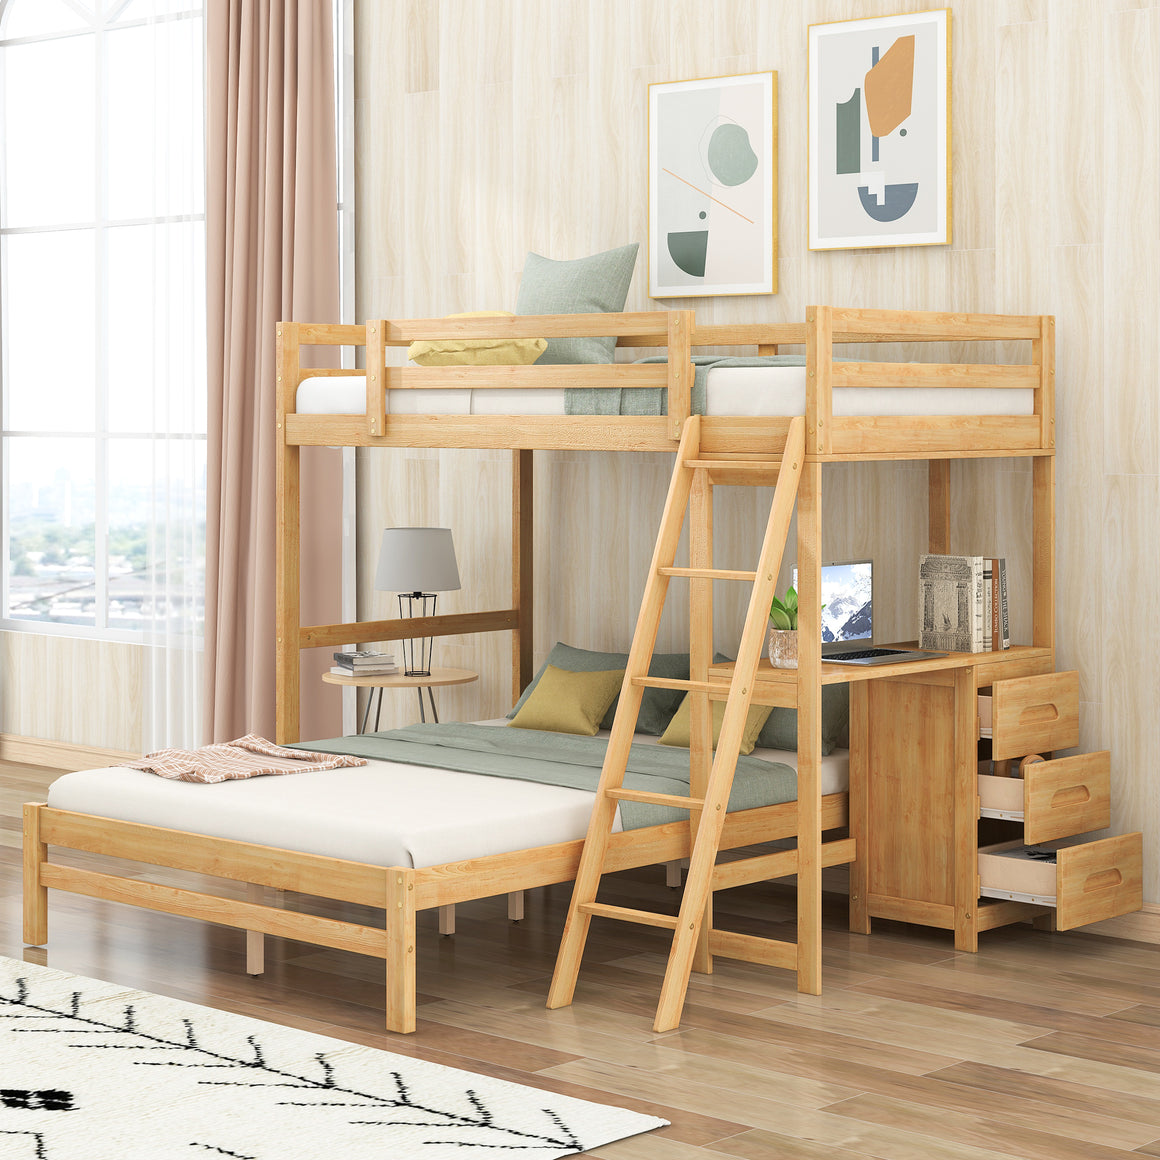 uhomepro Twin over Full Bunk Bed with Desk and Drawers, Solid Wood Loft Bed with Guardrail and Ladder for Kids Teens Adults, Can Be Divided Into 2 Beds, Multi-functional Bunk Bed, Natural